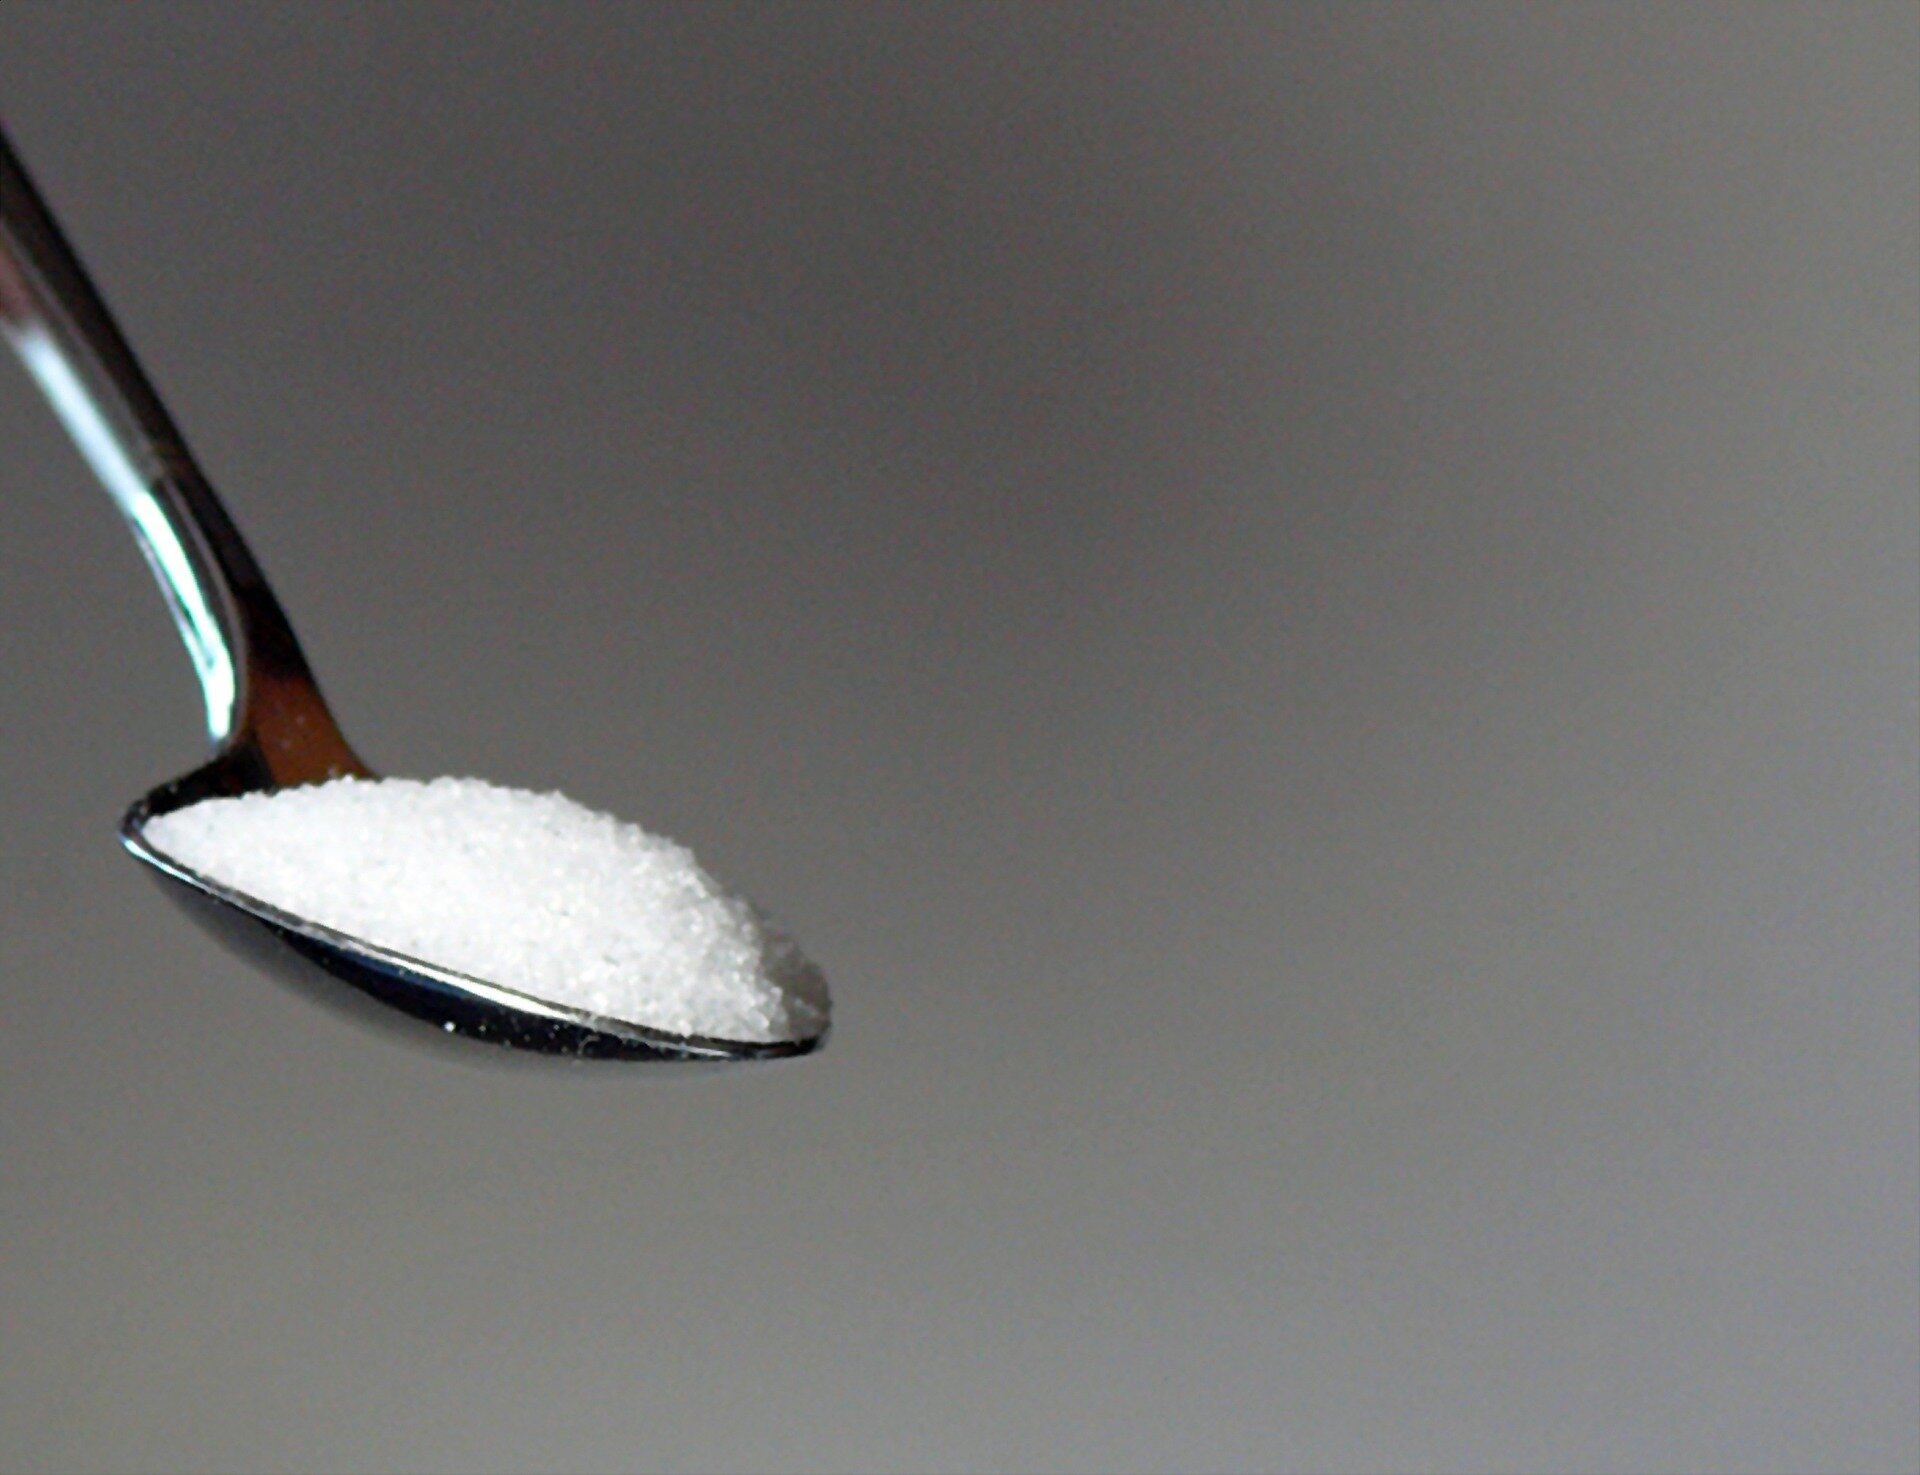 Do sweeteners increase your appetite? New evidence from randomized controlled trial says no